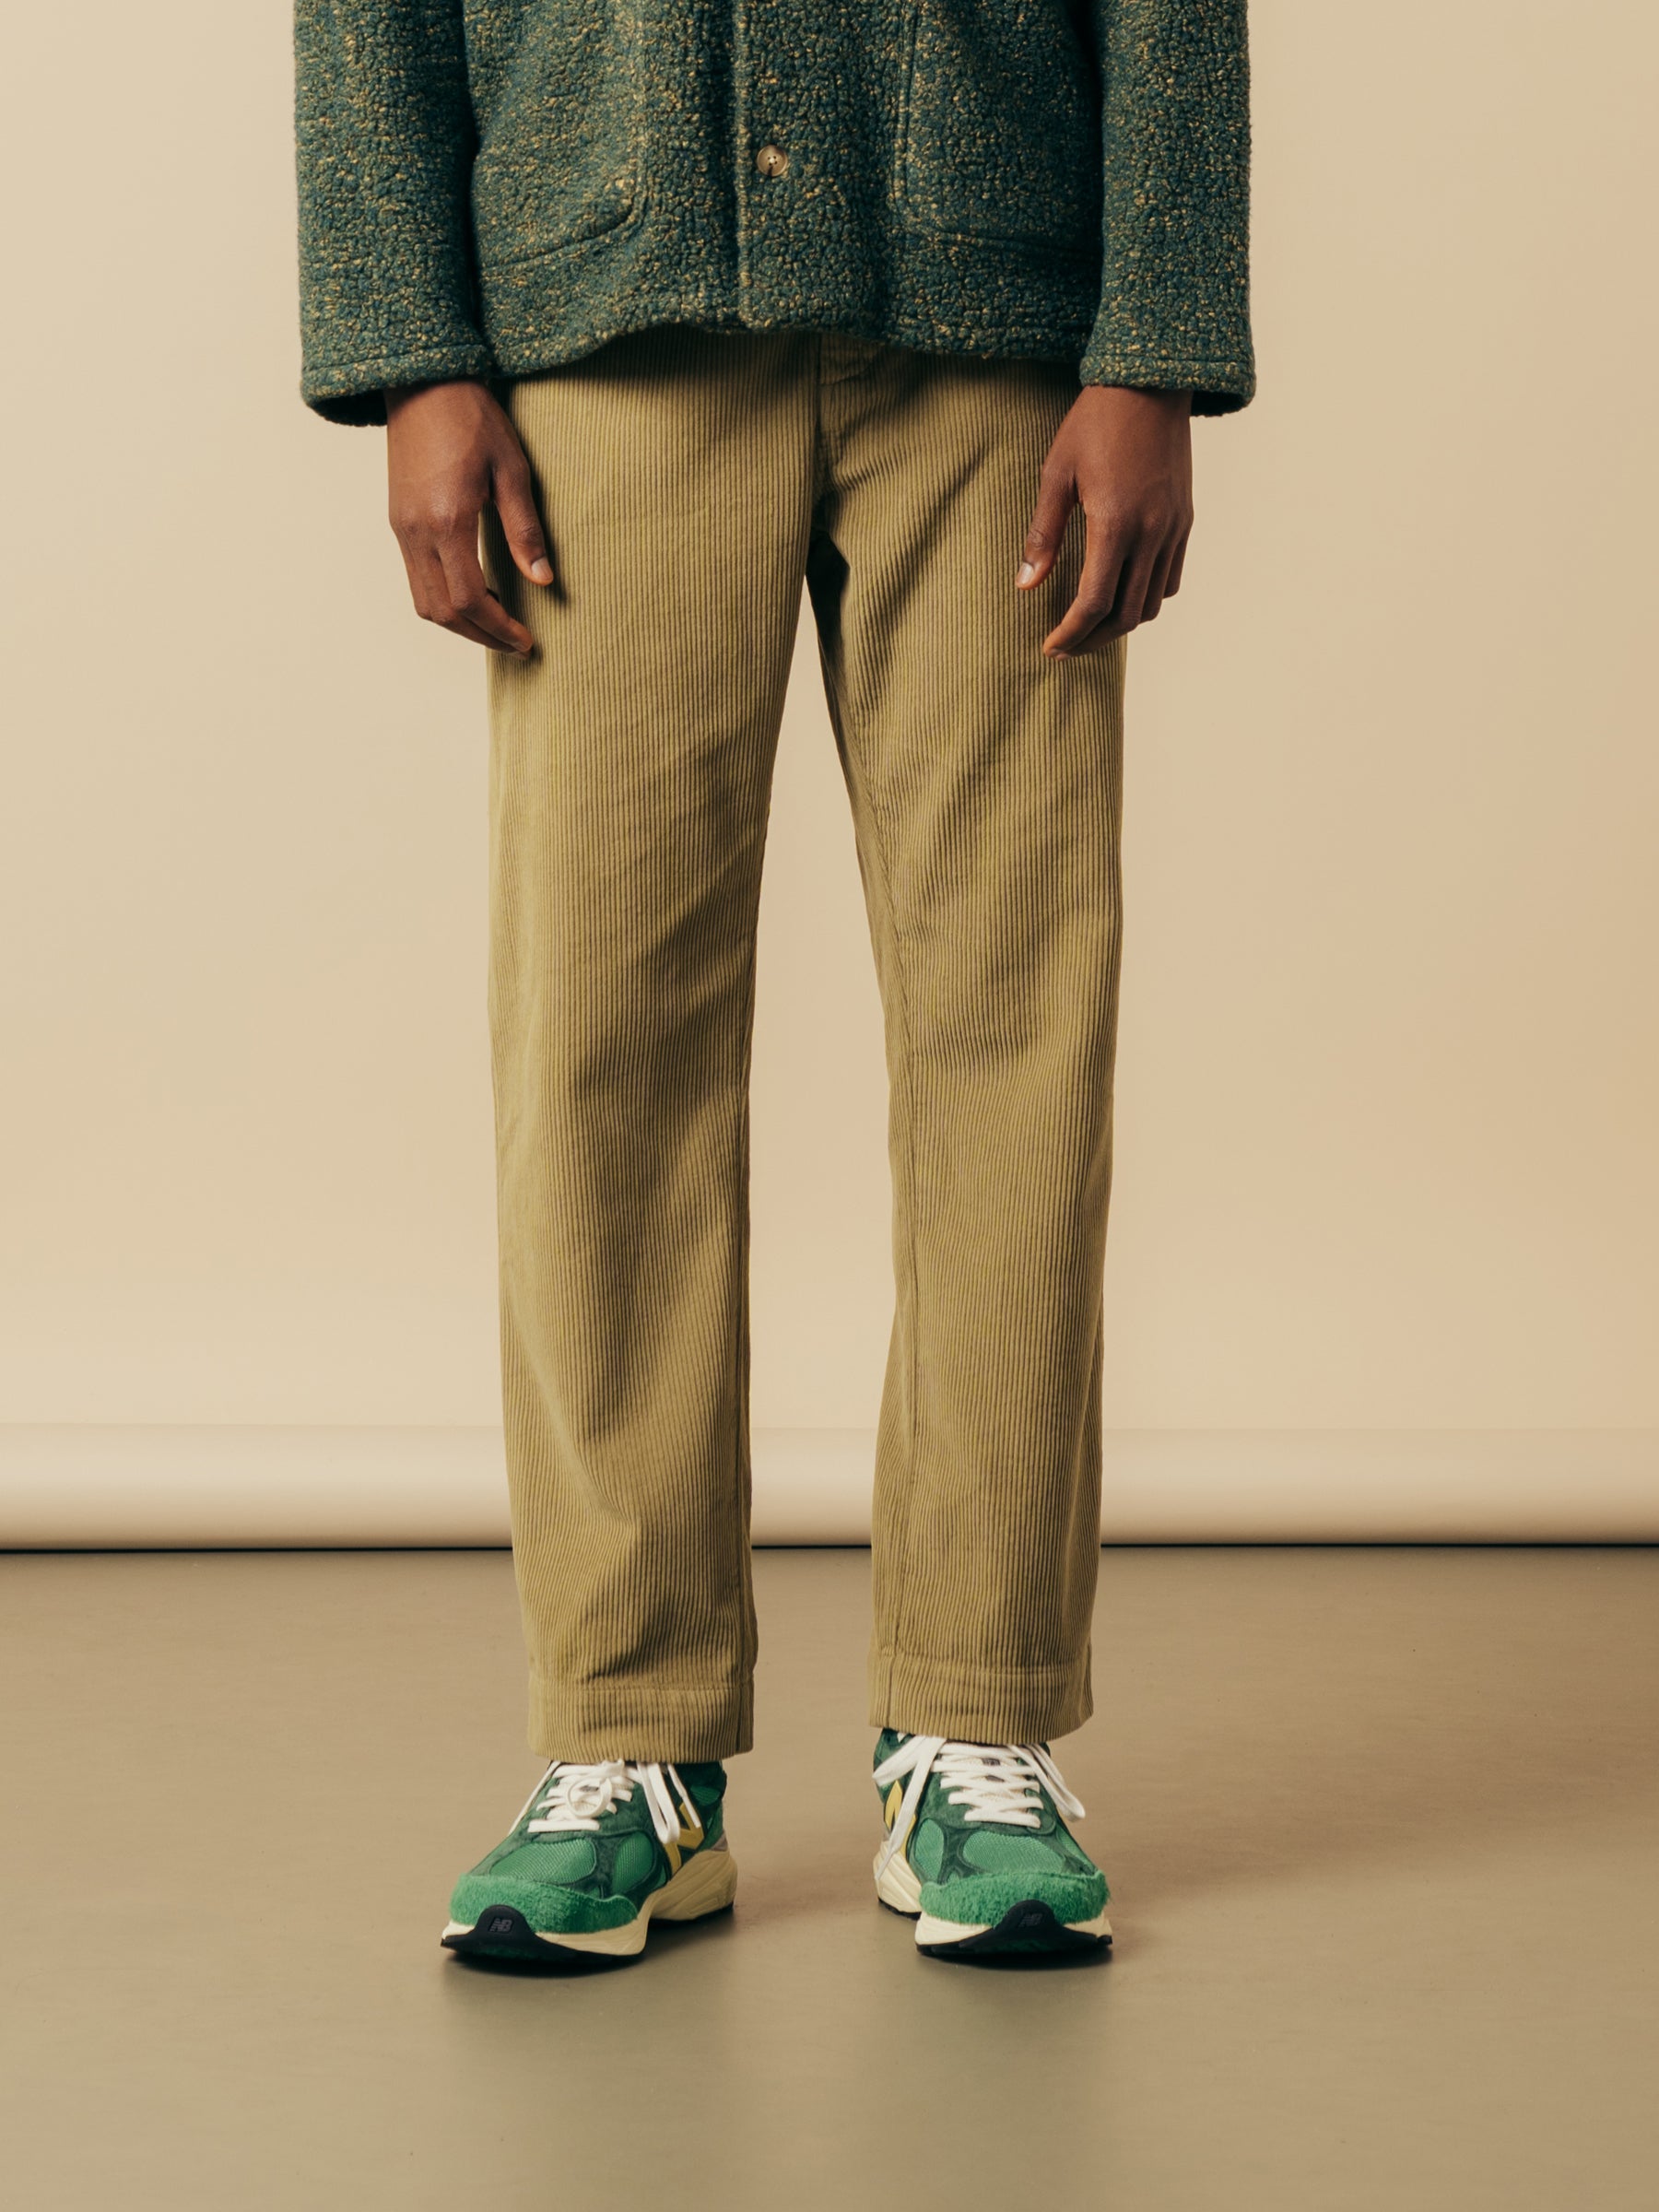 A pair of straight leg workwear pants in a green corduroy.